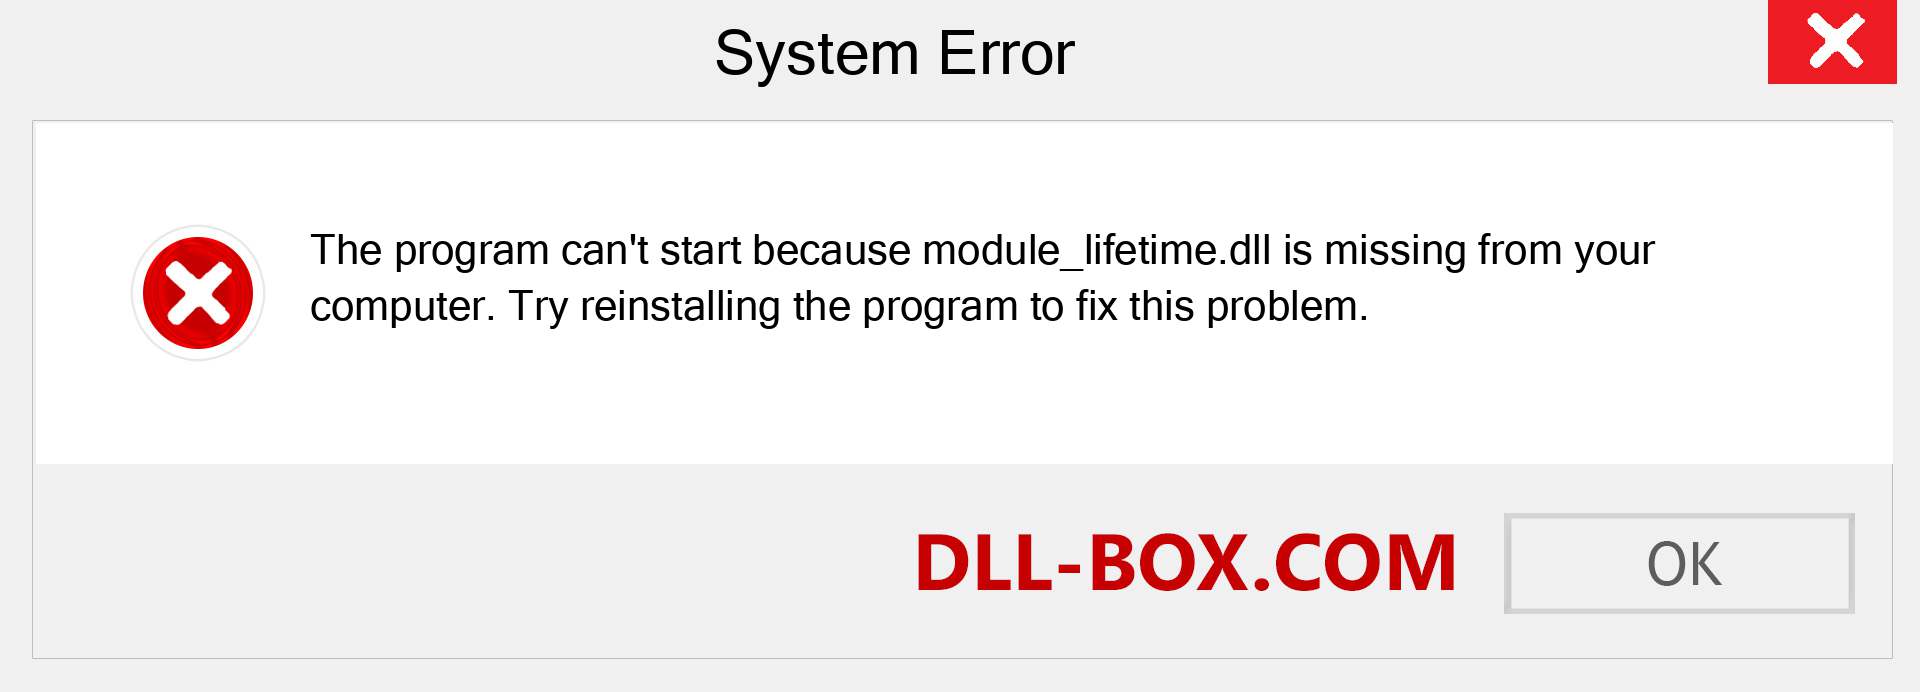  module_lifetime.dll file is missing?. Download for Windows 7, 8, 10 - Fix  module_lifetime dll Missing Error on Windows, photos, images